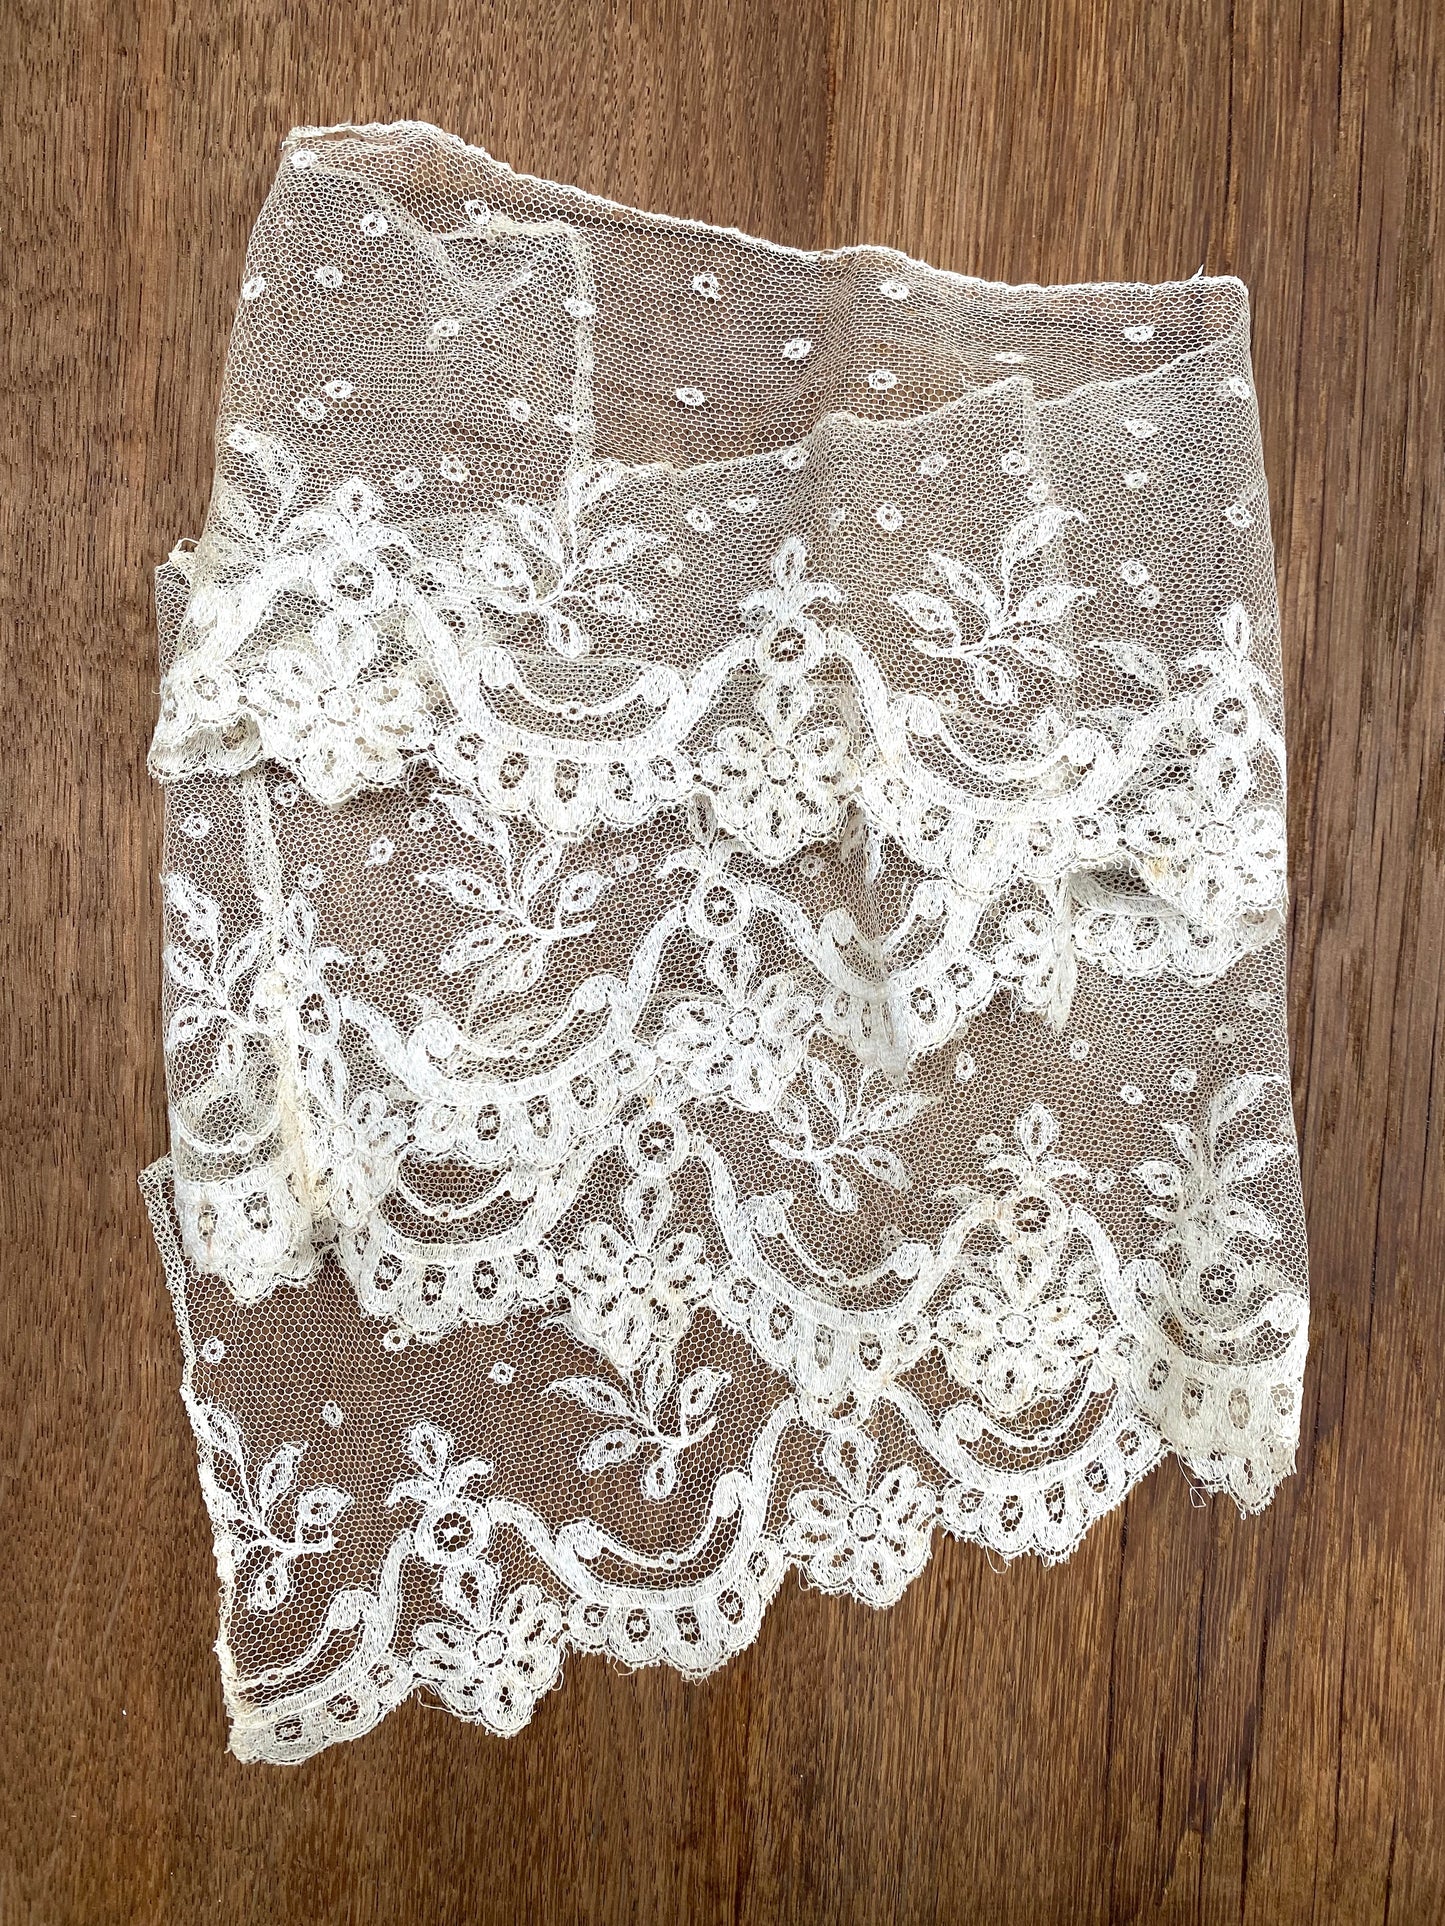 Antique French Polka Dot Lace Piece